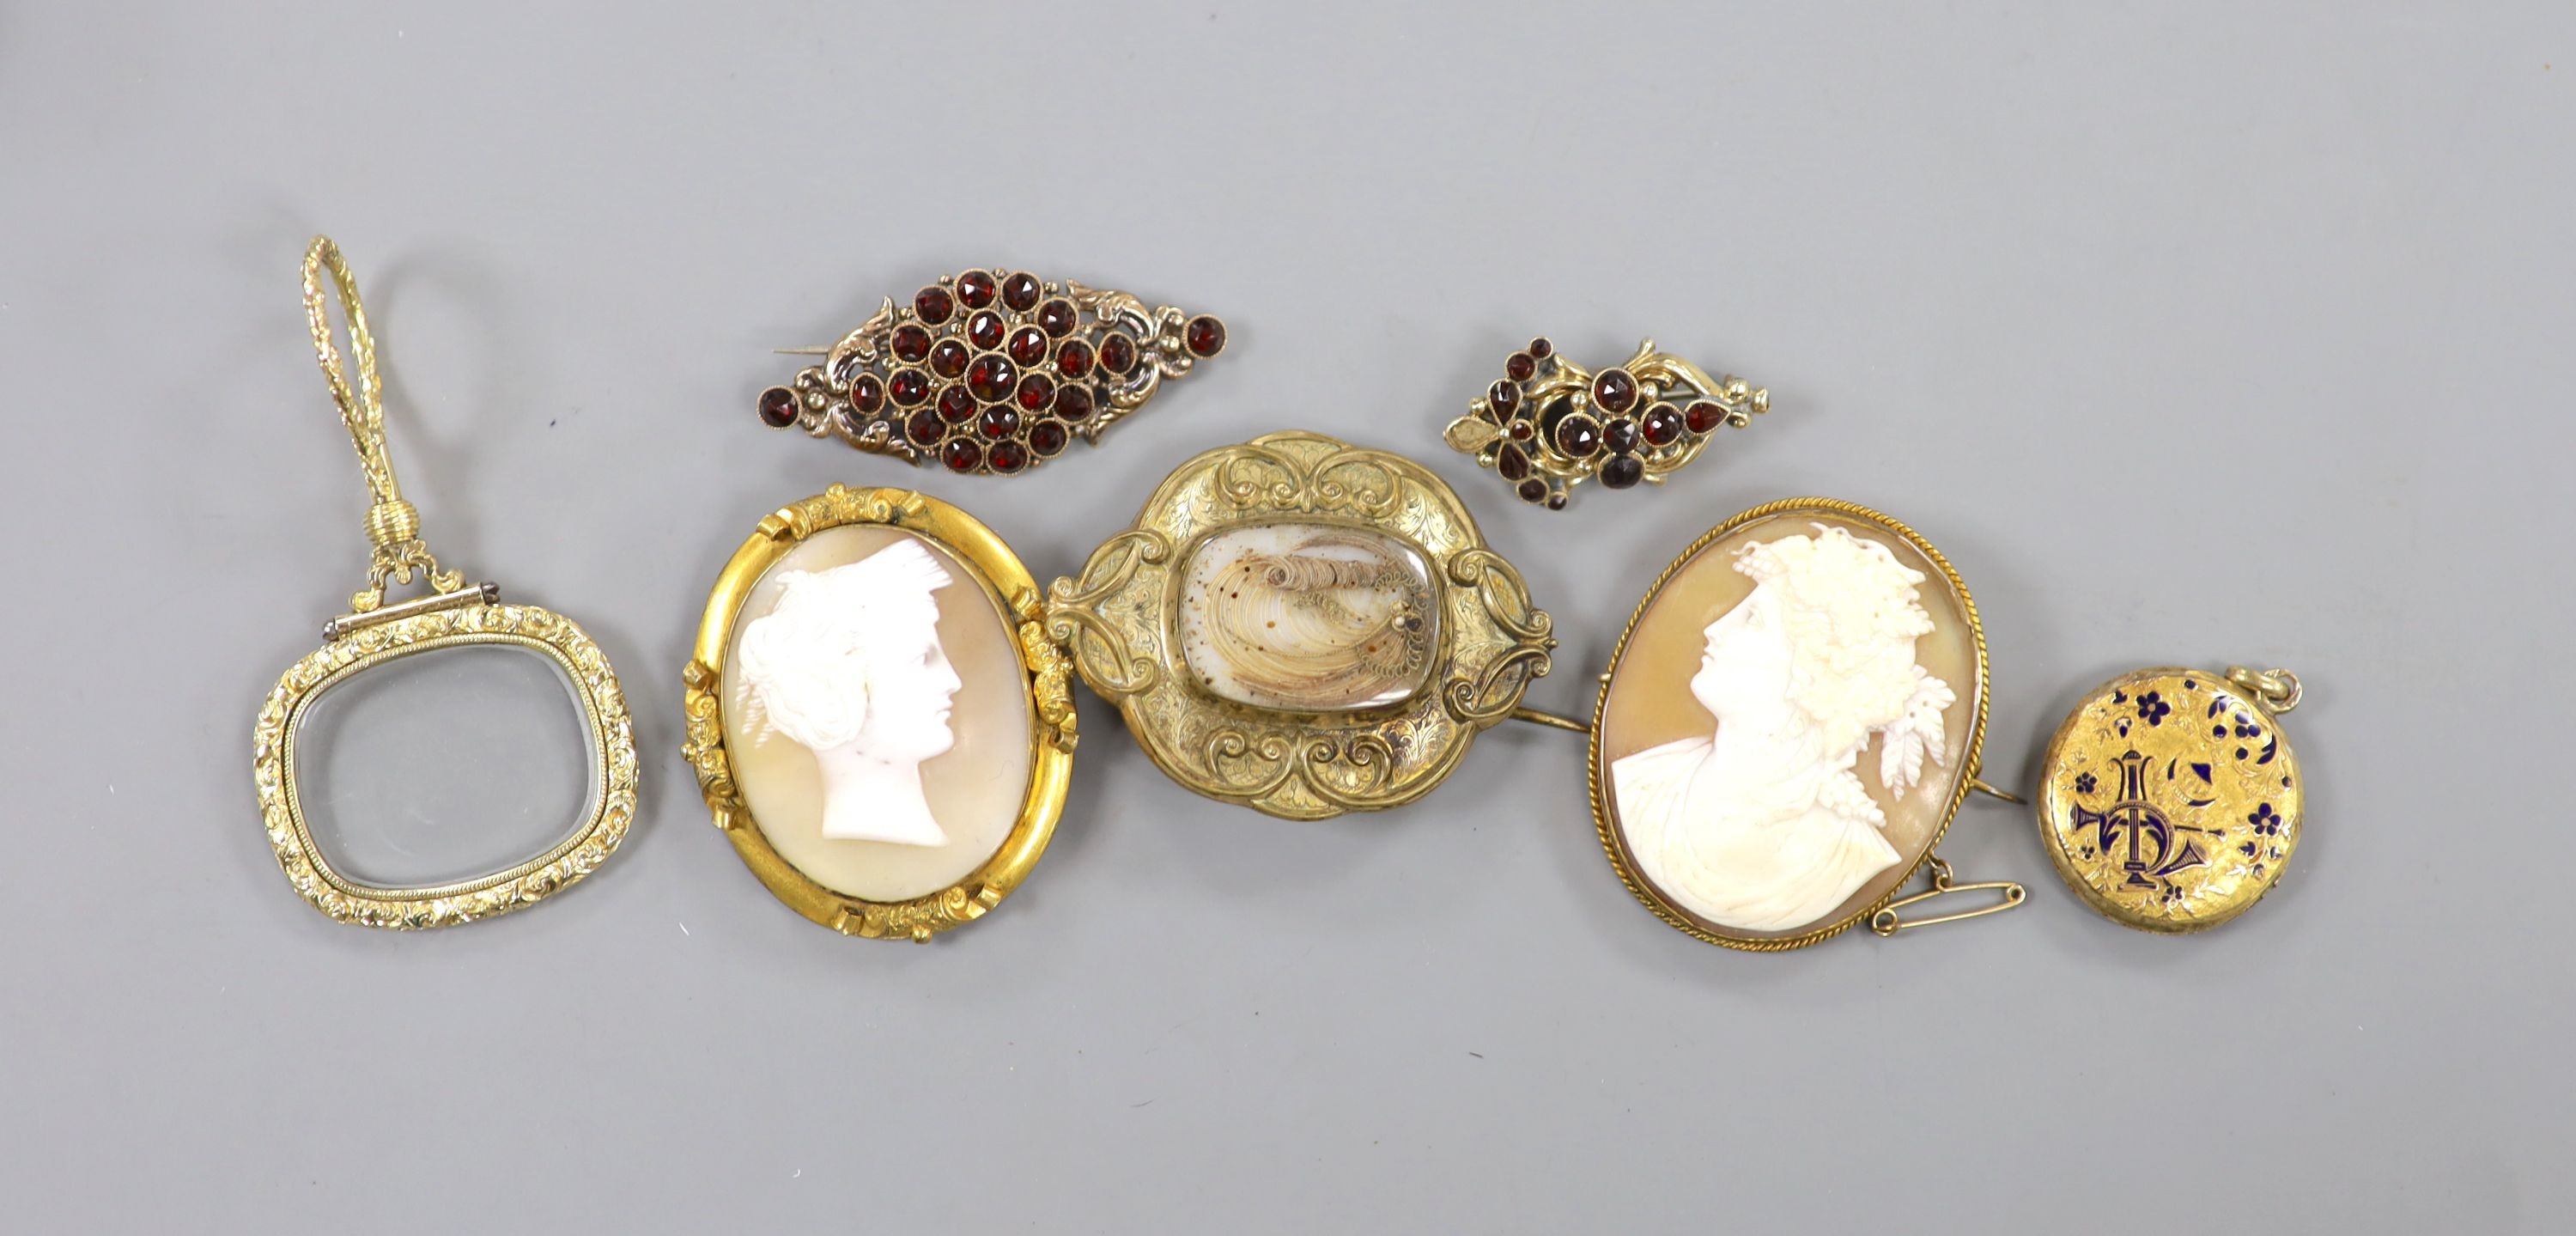 Seven items of Victorian base metal or pinchbeck jewellery including cameos, mourning brooch, eye glass and garnet brooches.